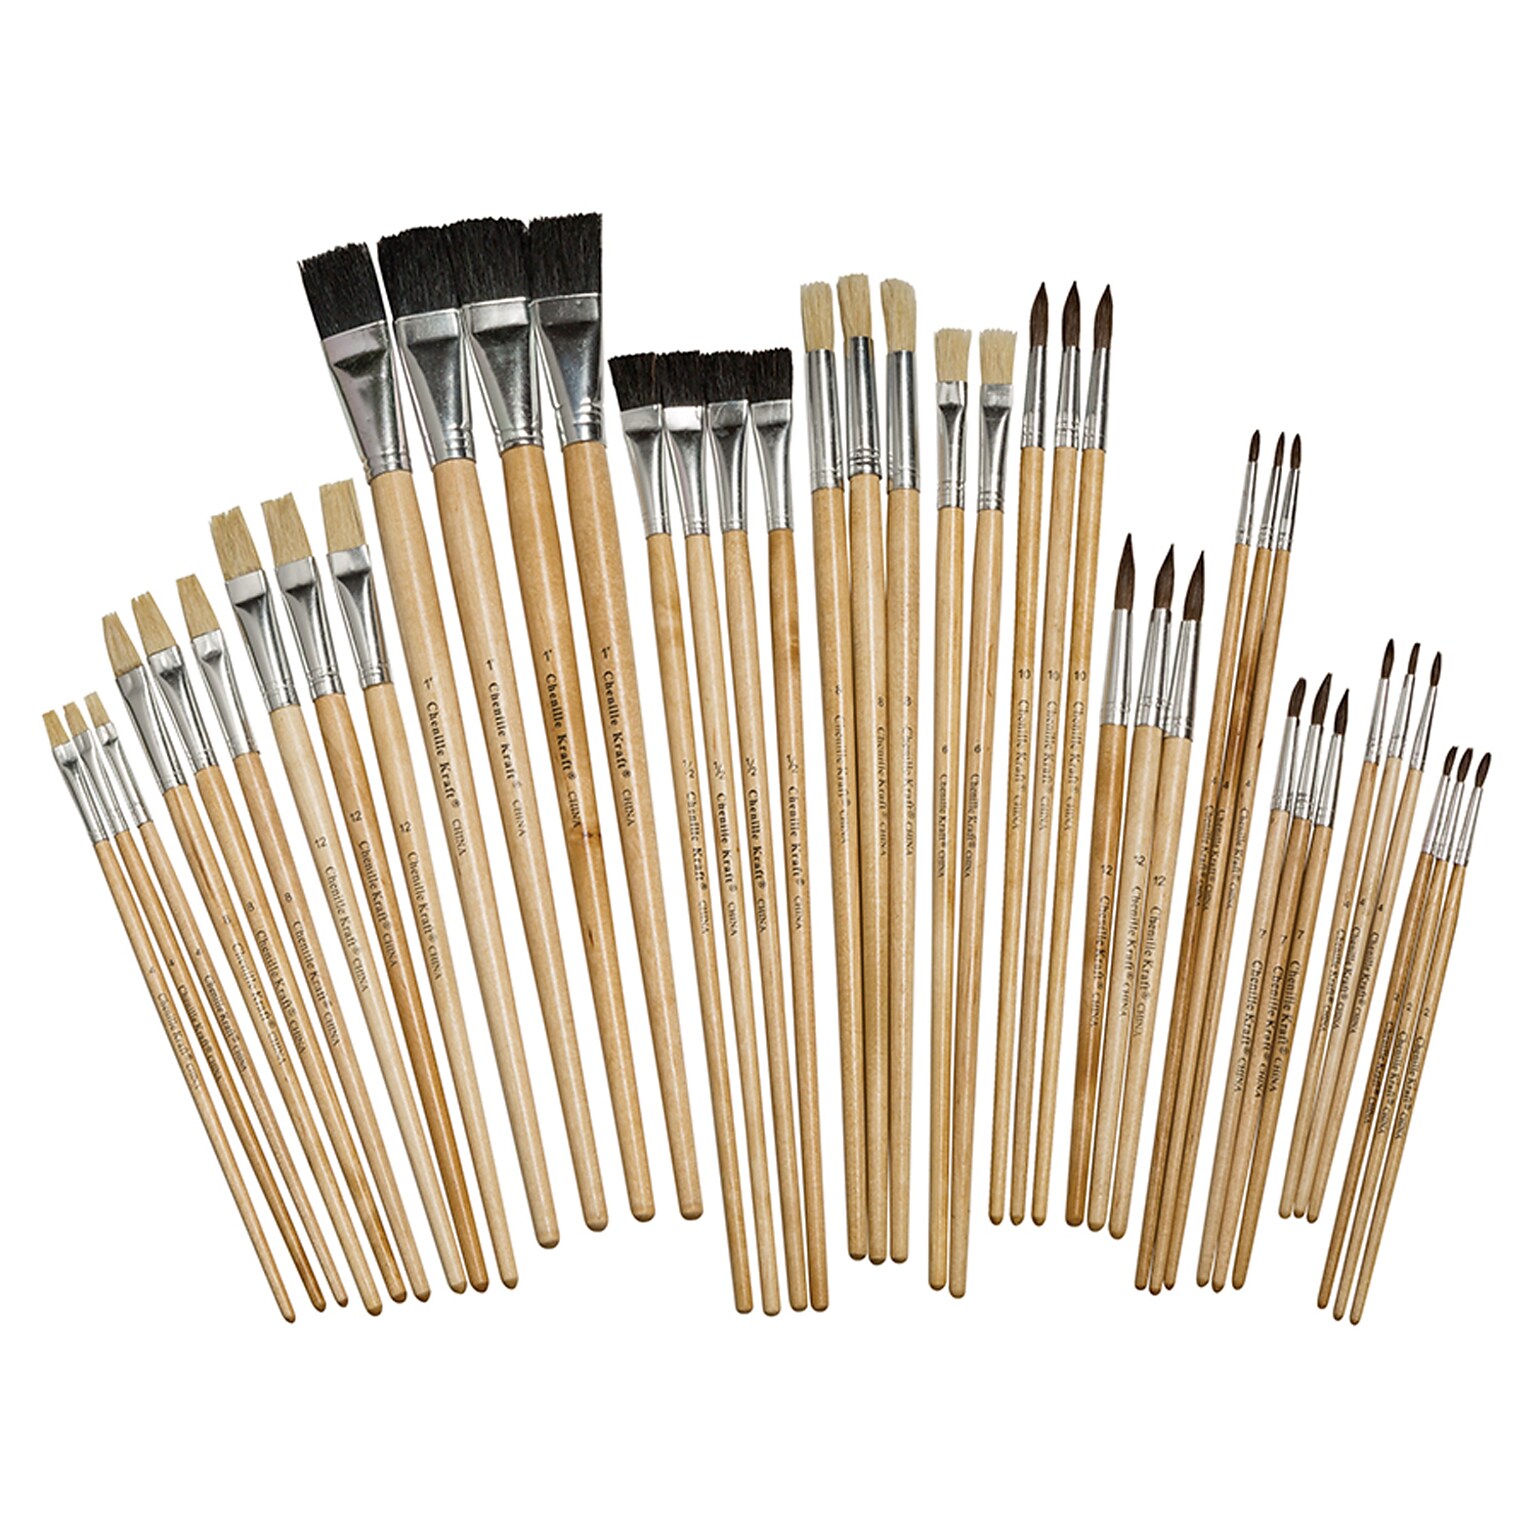 Pacon Brush Assortment Ages 5+, Set of 40 Brushes (PACAC5220)